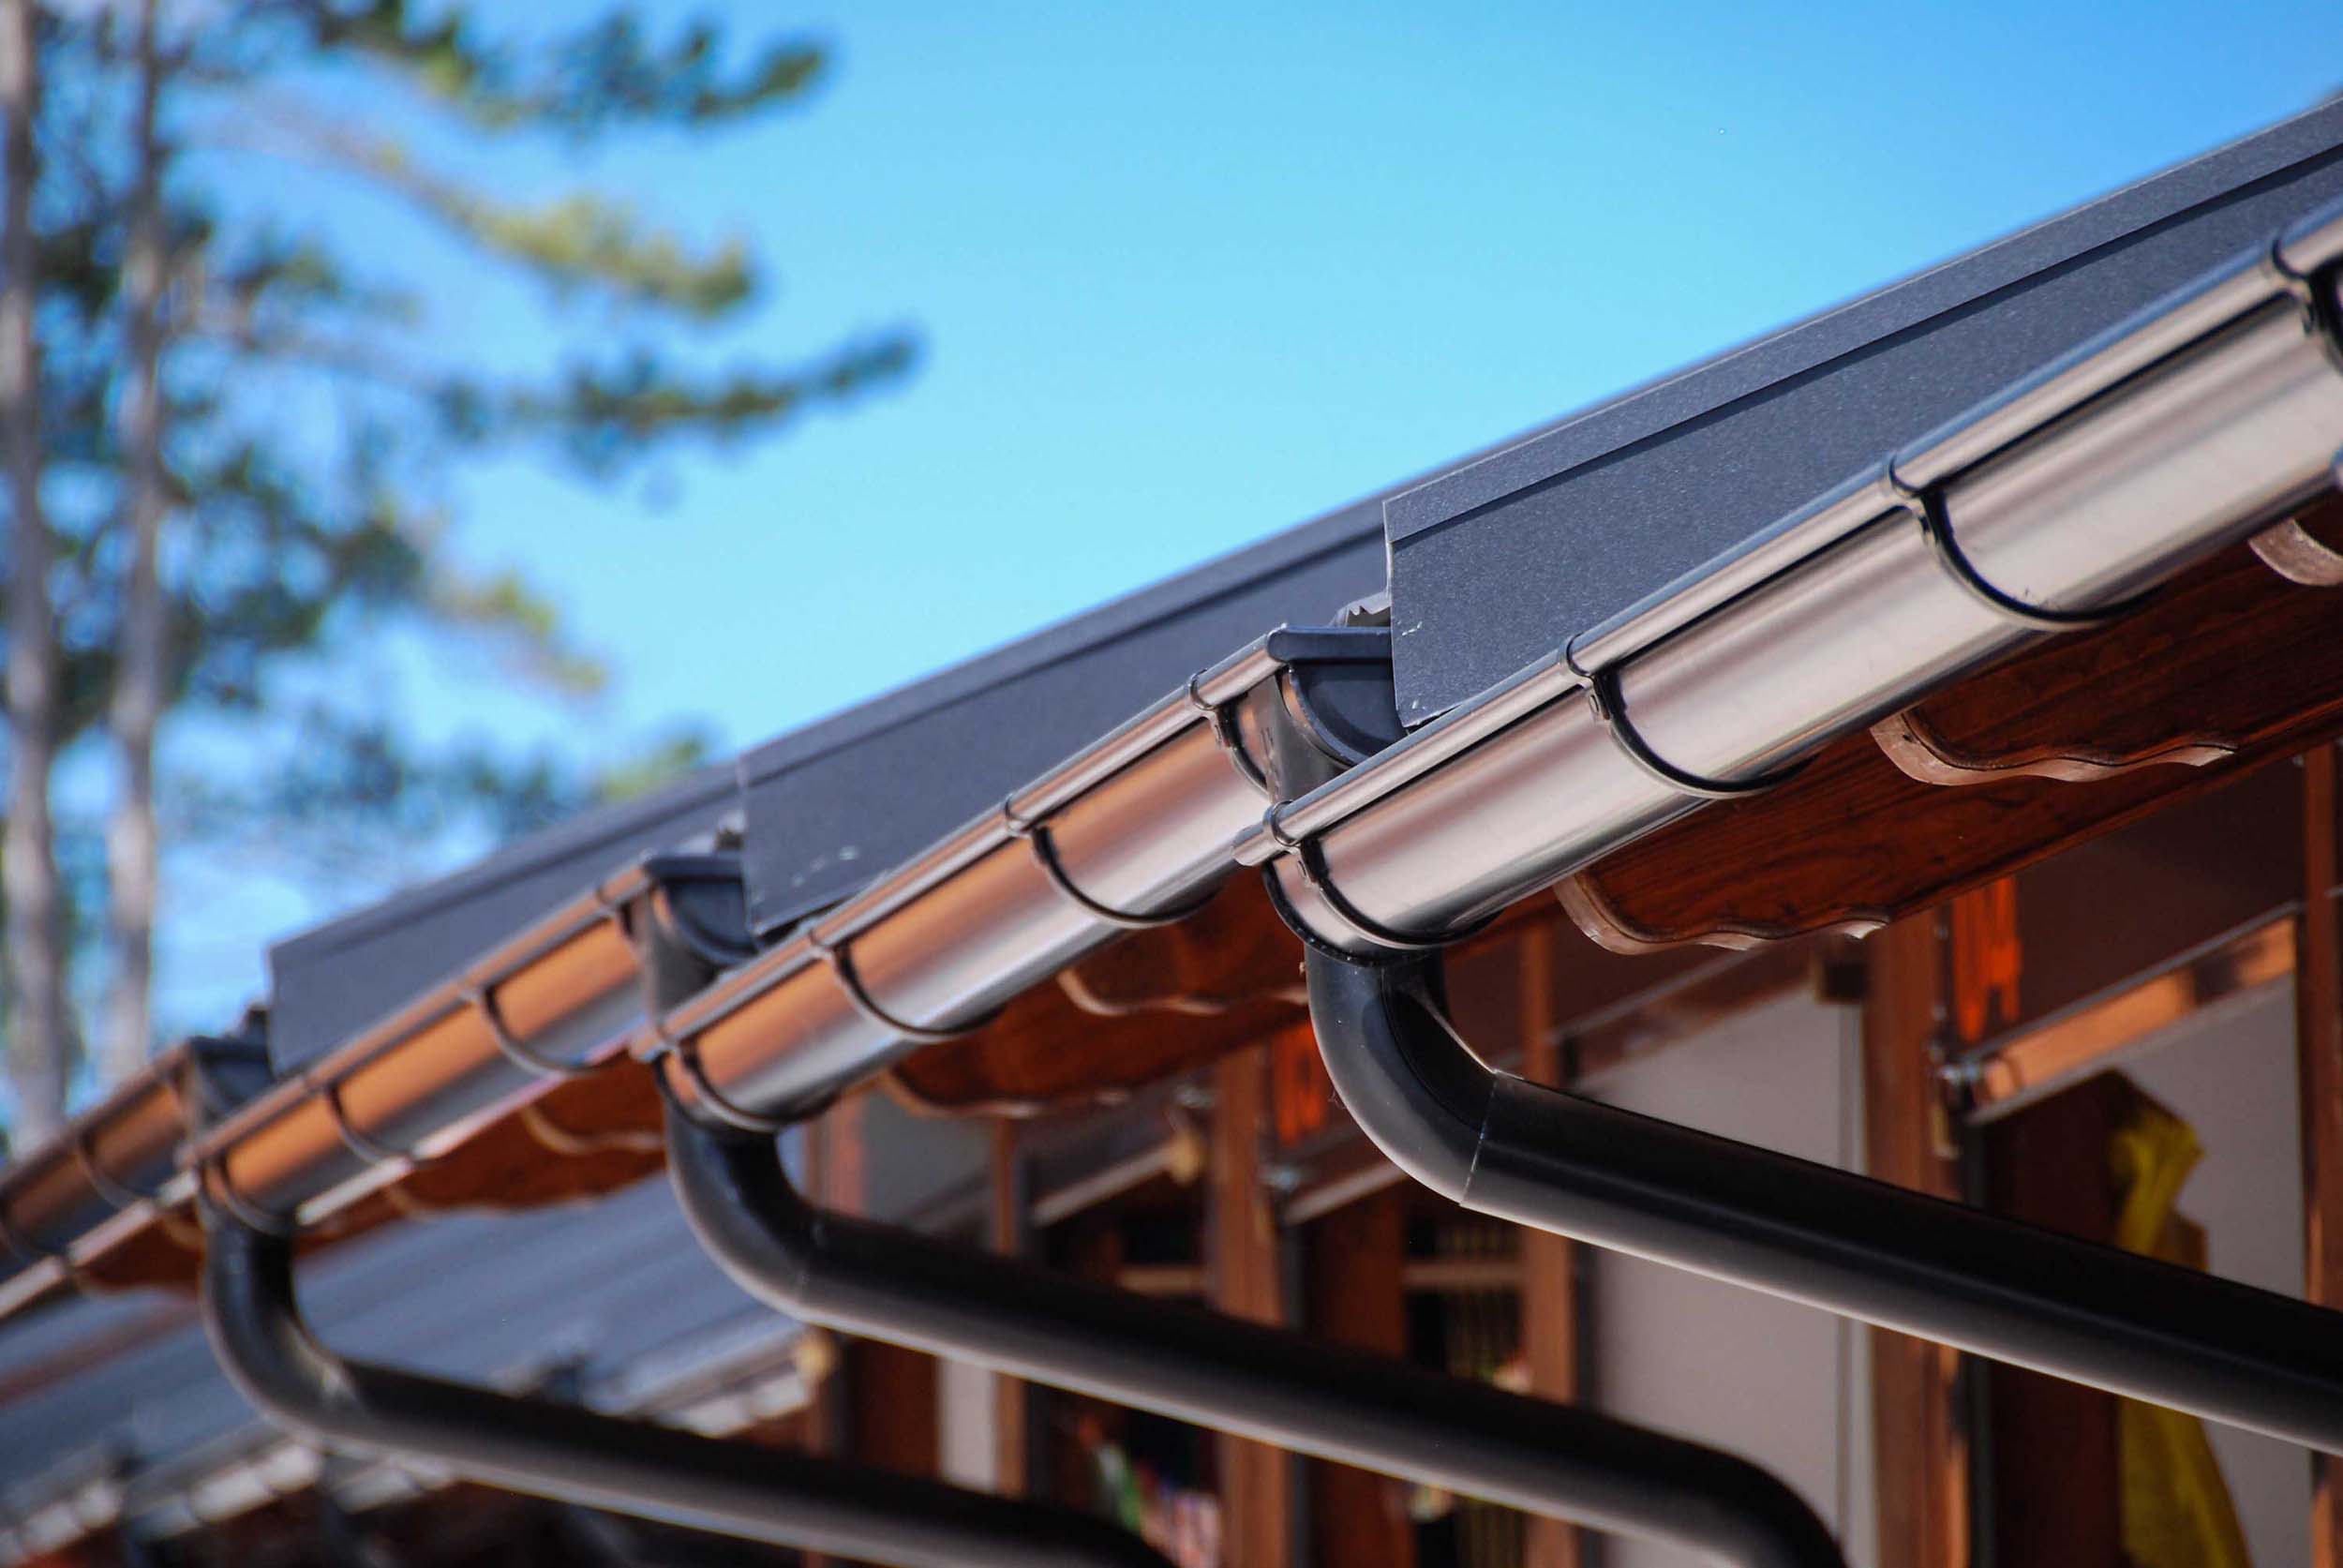 A Series of Gutters